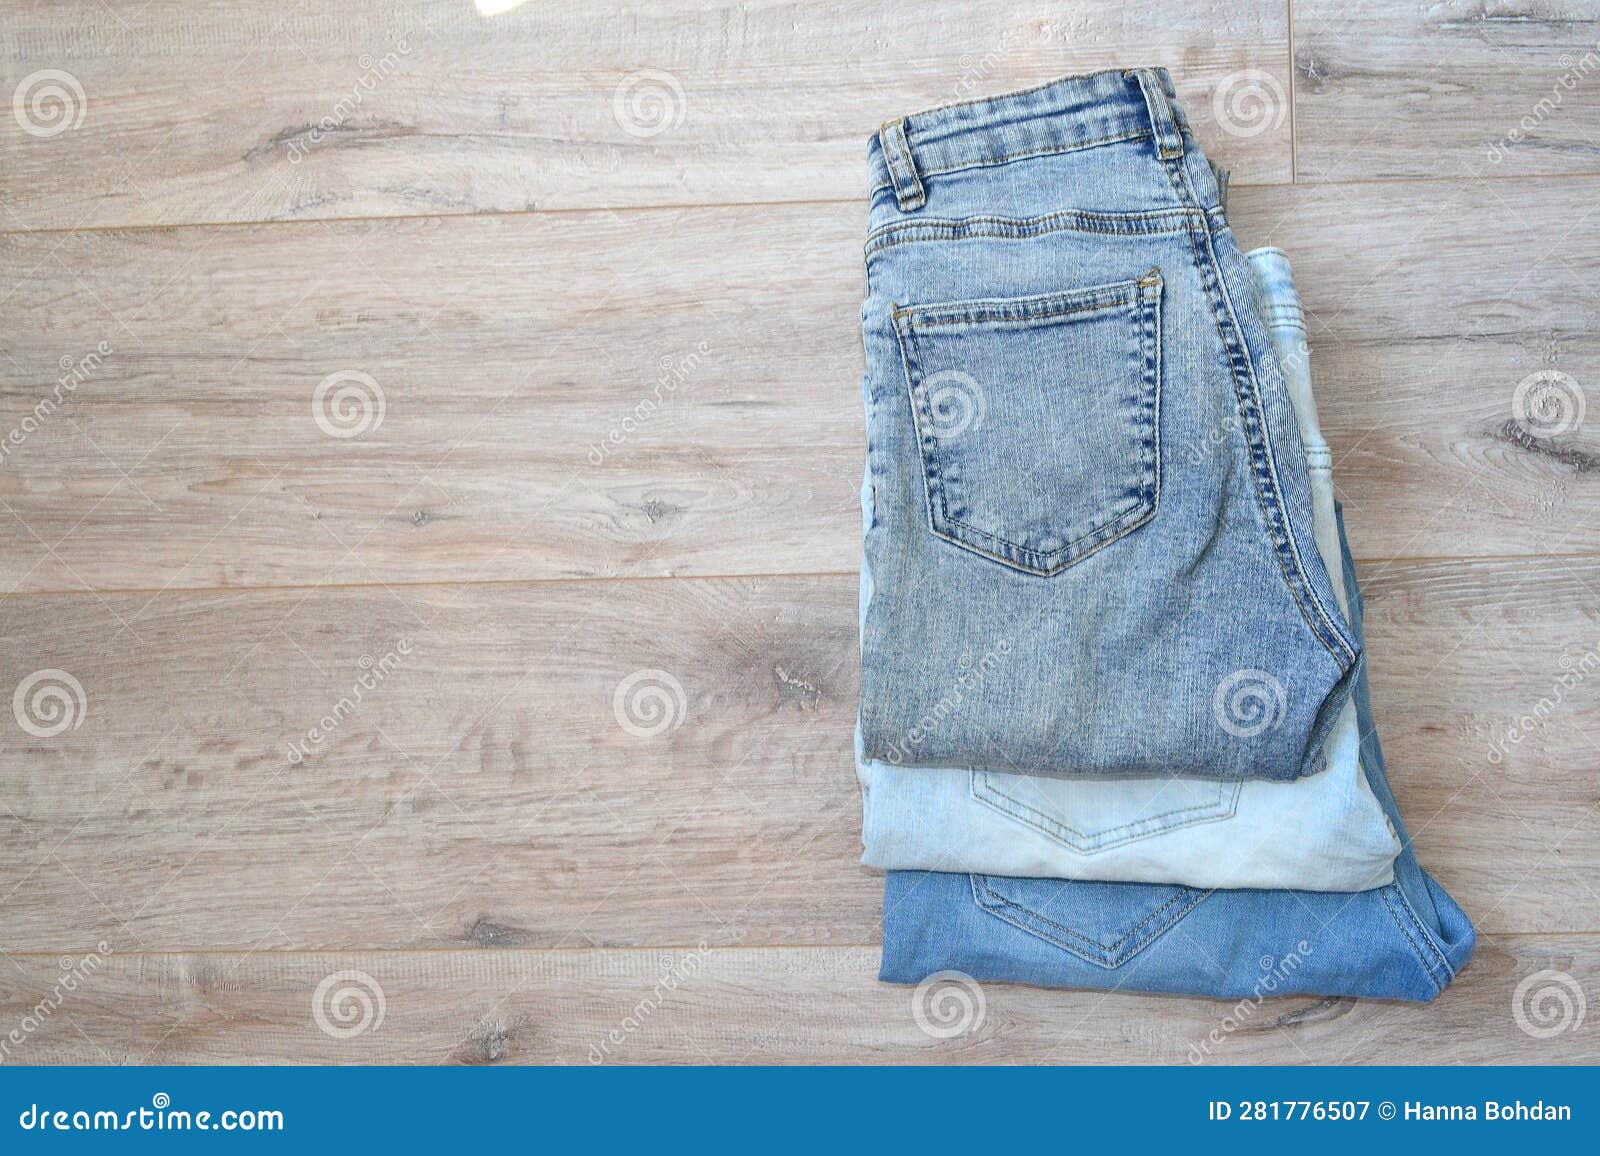 Three Pairs of Jeans Lie on the Floor Stock Image - Image of background ...